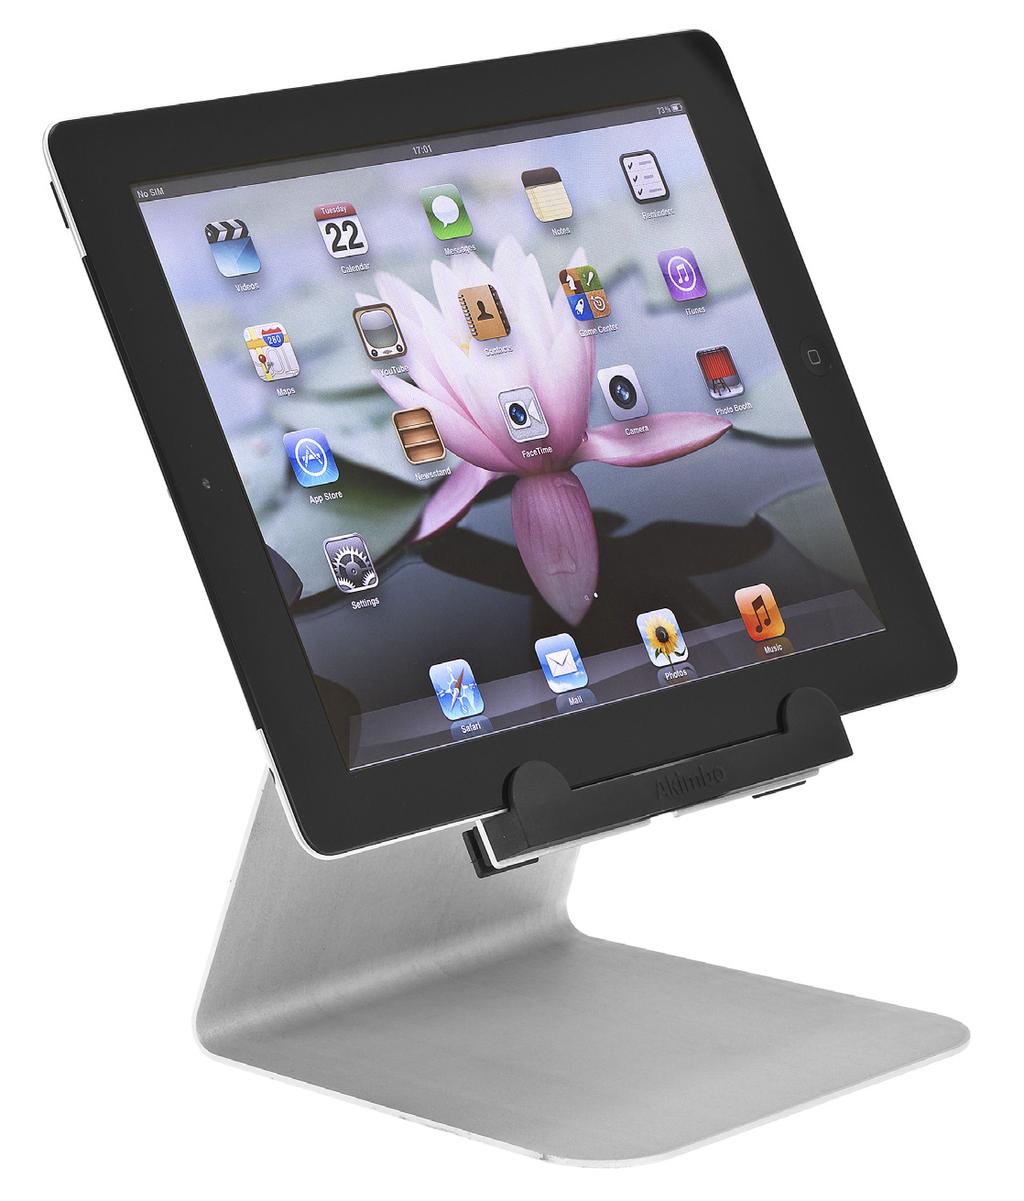 TABSTAND FOR DESKTOP DISPLAY PRODUCT CODE 7645 9 The ipad has become an integral part of daily life but using it in a comfortable position can be challenging.